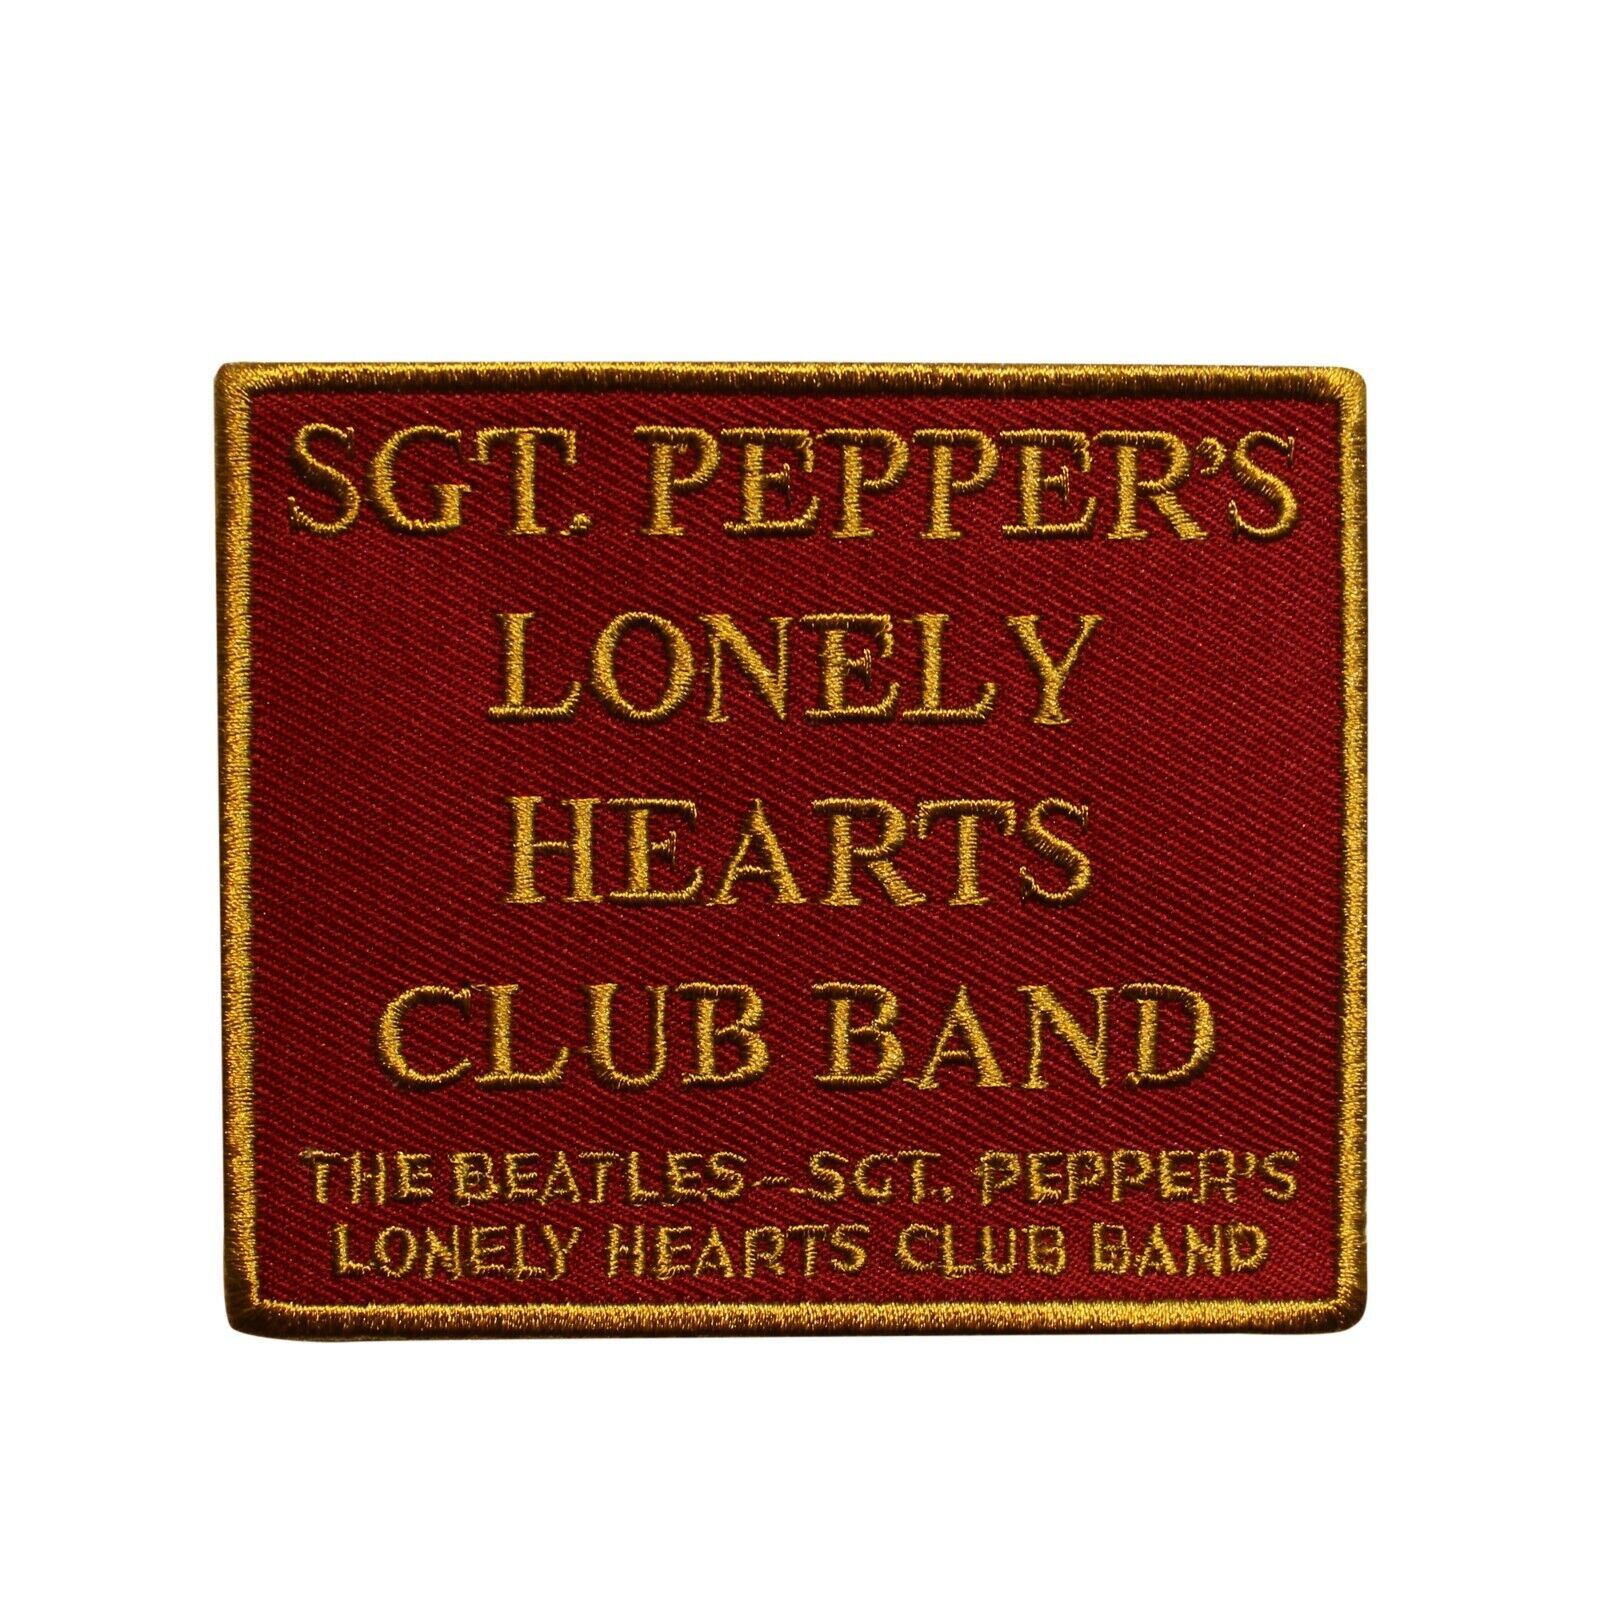 The Beatles Sgt Peppers Lonely Hearts Club Band Embroidered Sew On Patch - 075-B